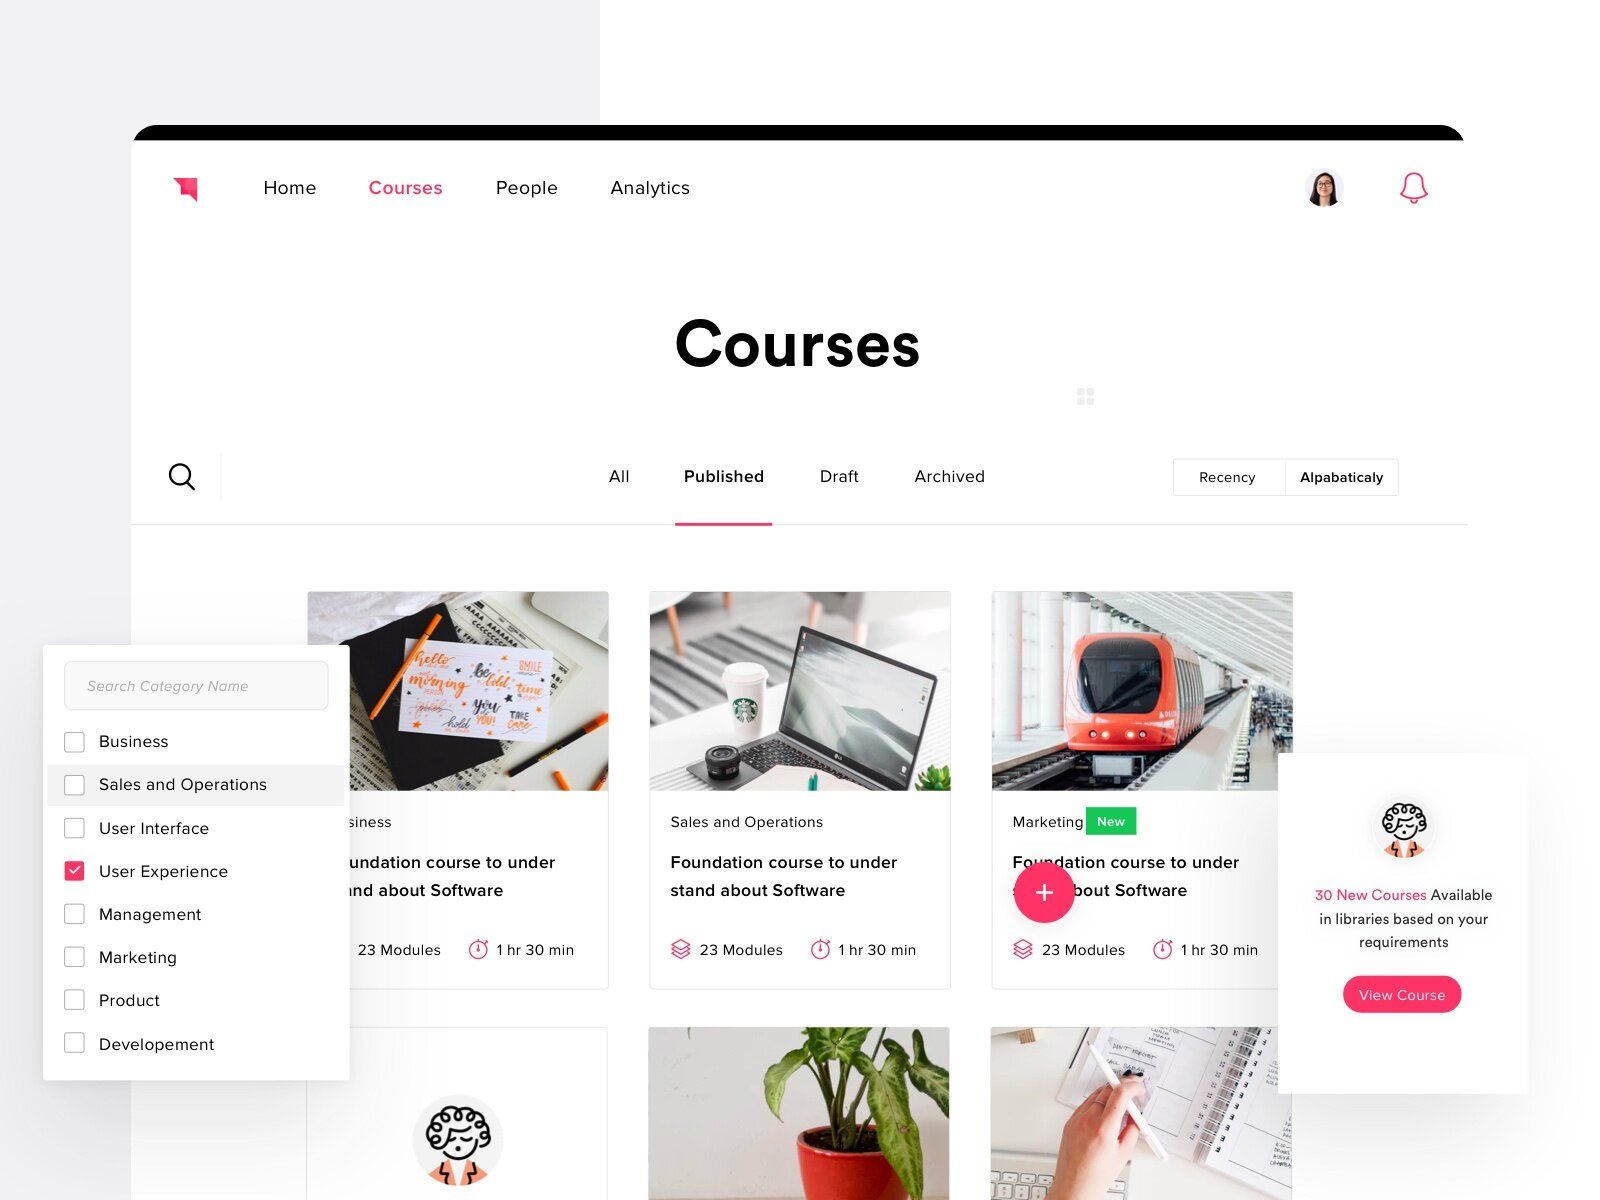 An example of online learning website titles screen example that you can use to during the website development (*image by [Brucira Design](https://dribbble.com/Bruciradev){ rel="nofollow" .default-md}*)